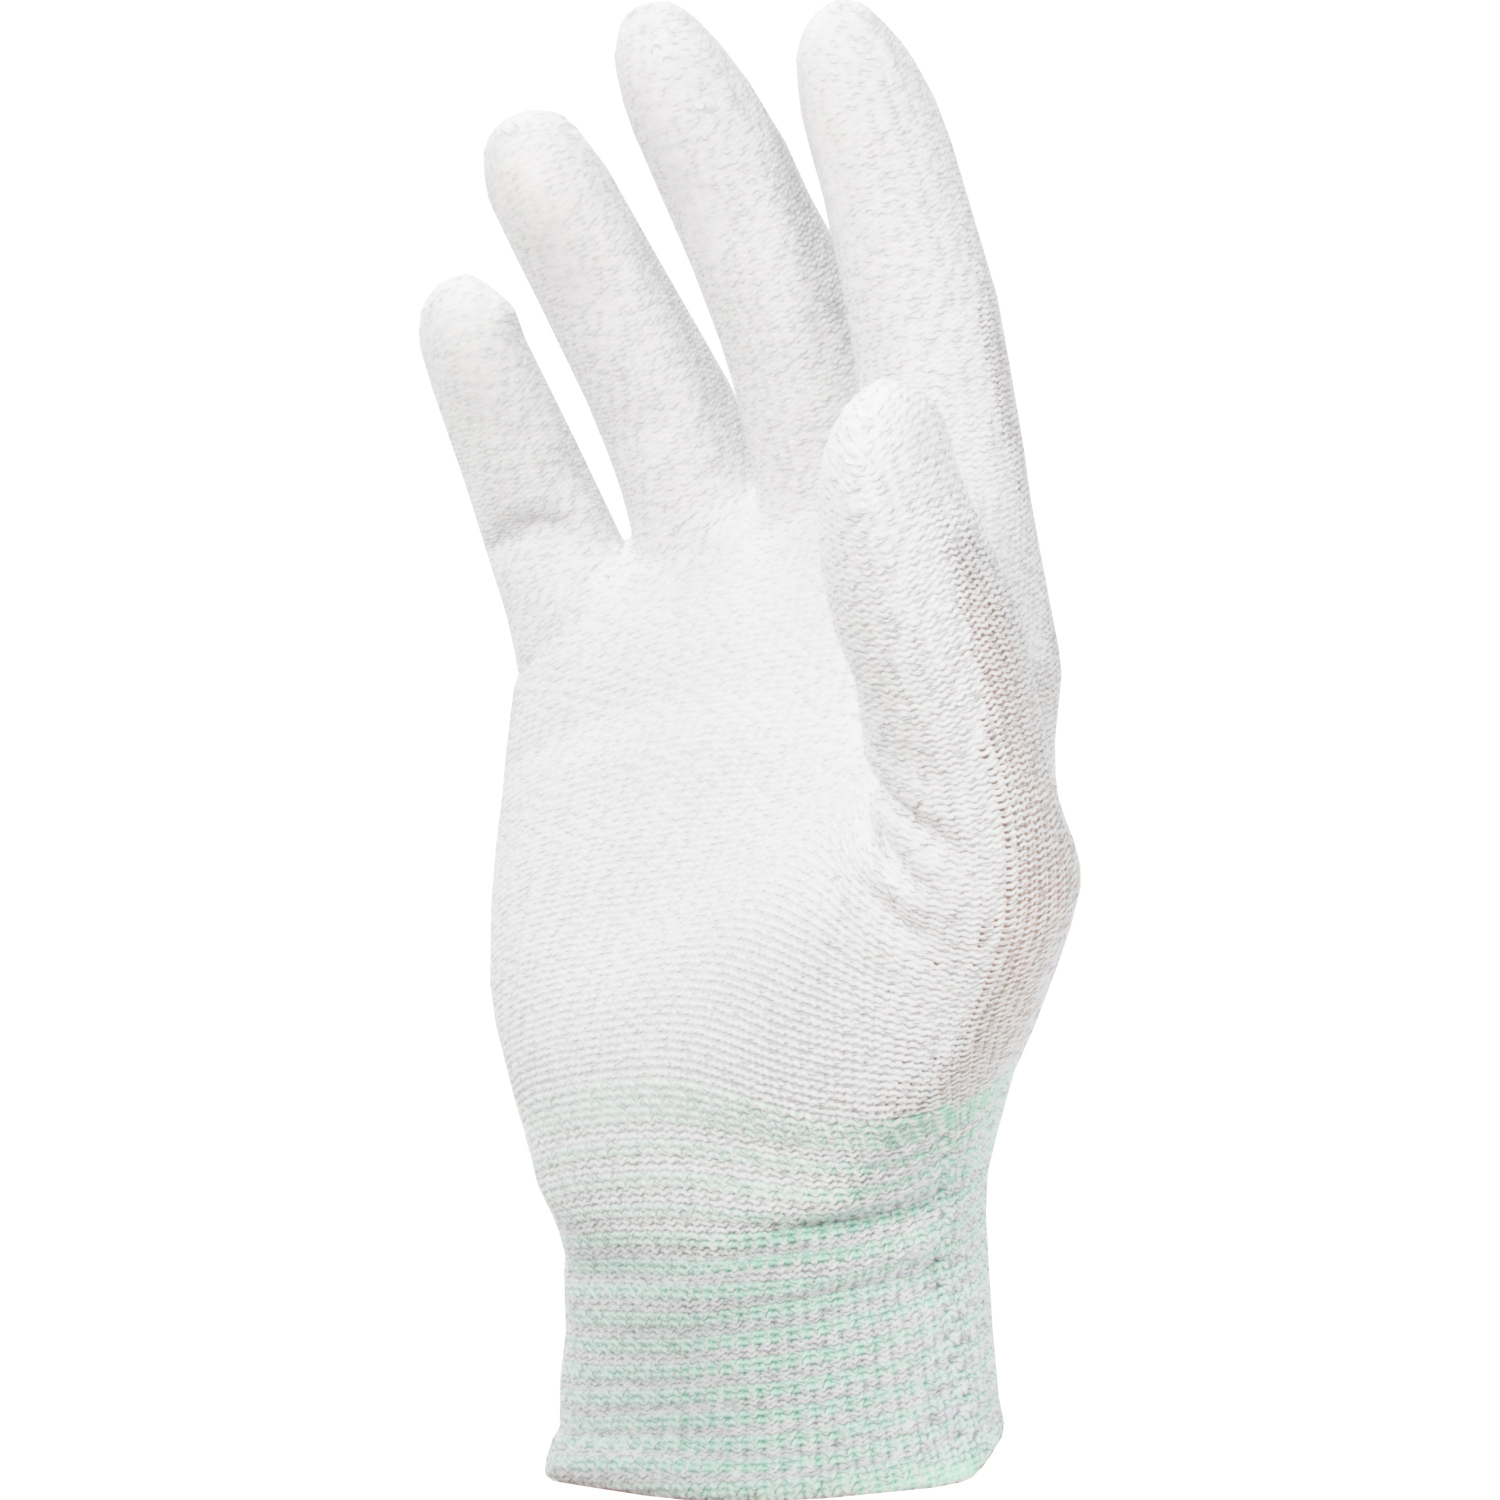 ESD-Handschuh SIMSTAT® Palm